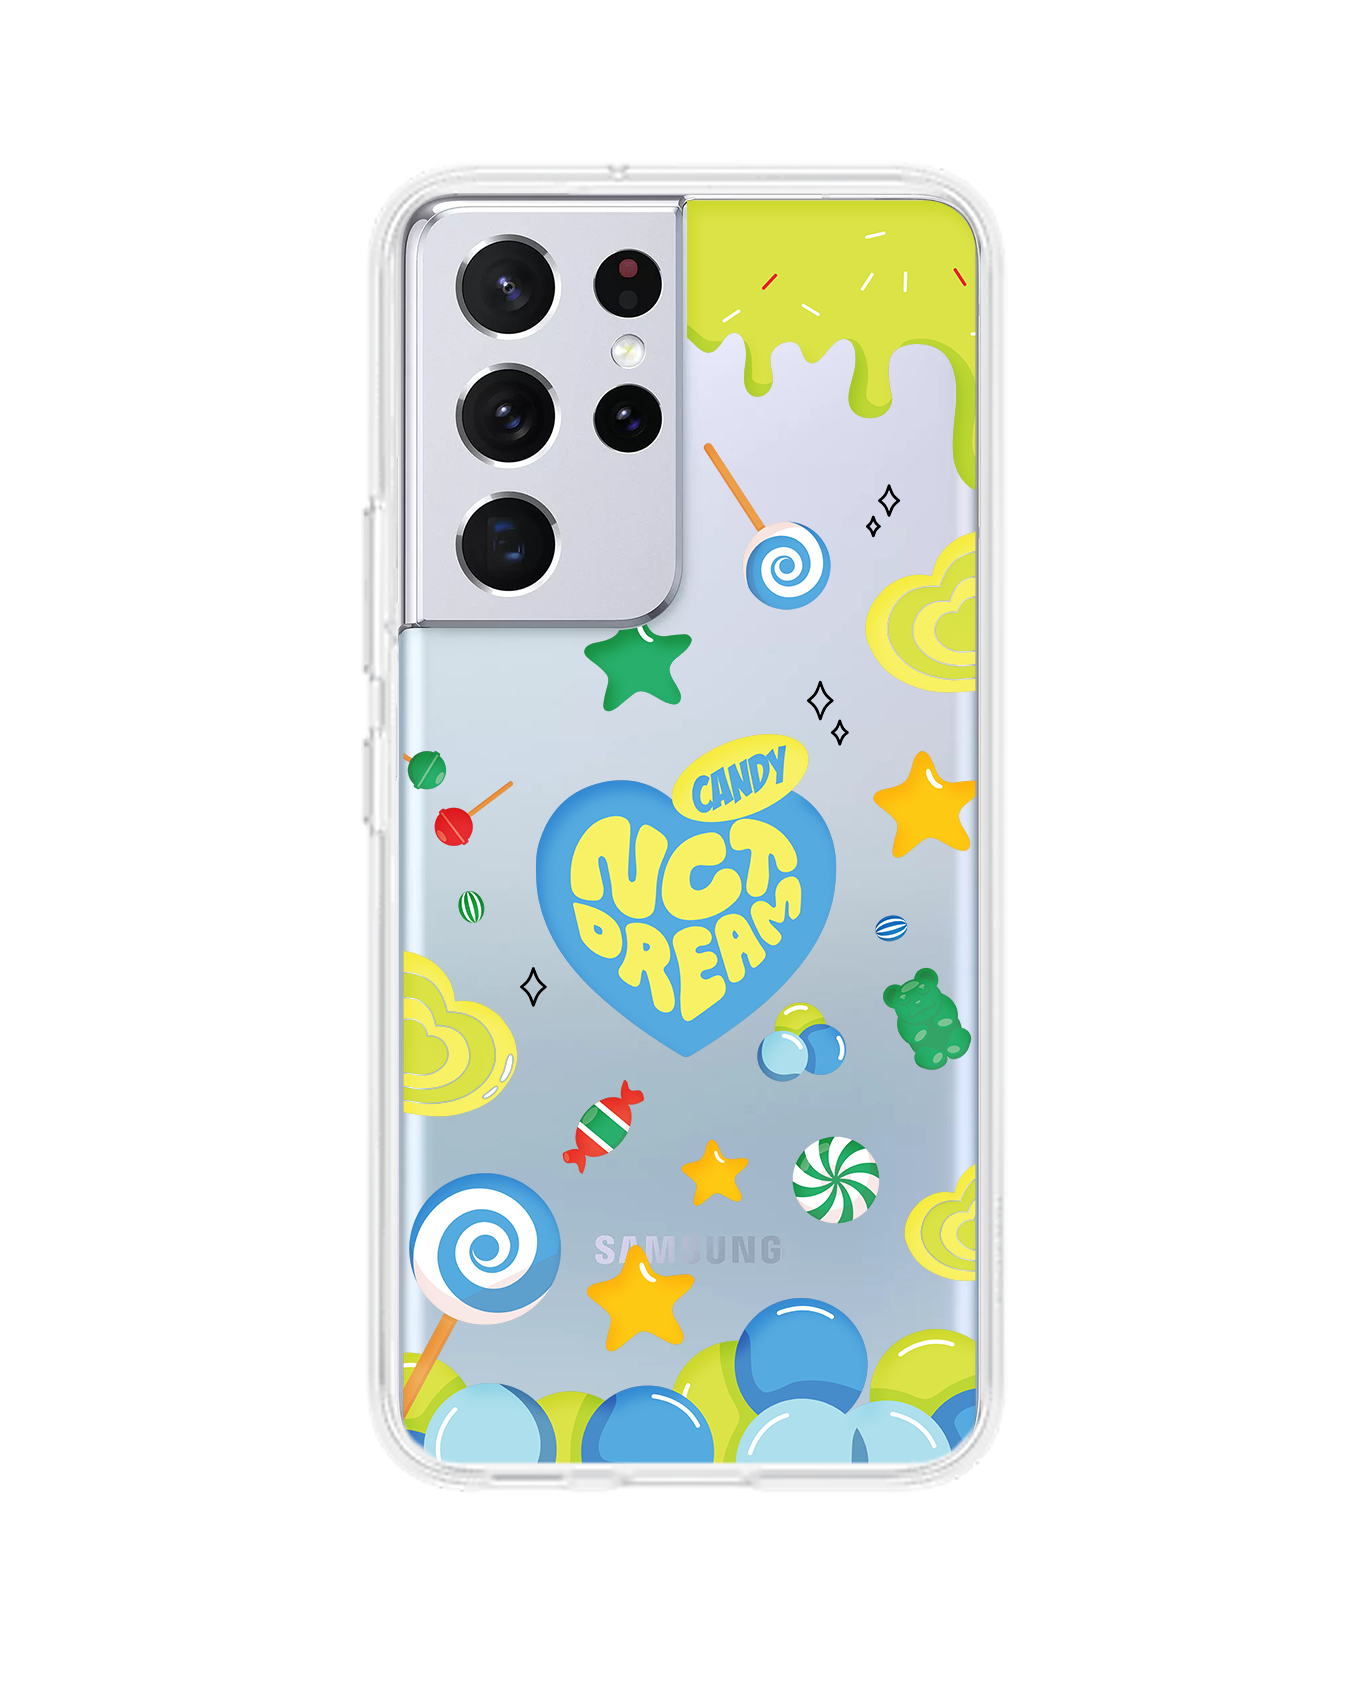 Android Rearguard Hybrid Case - NCT Dream Candy 2.0